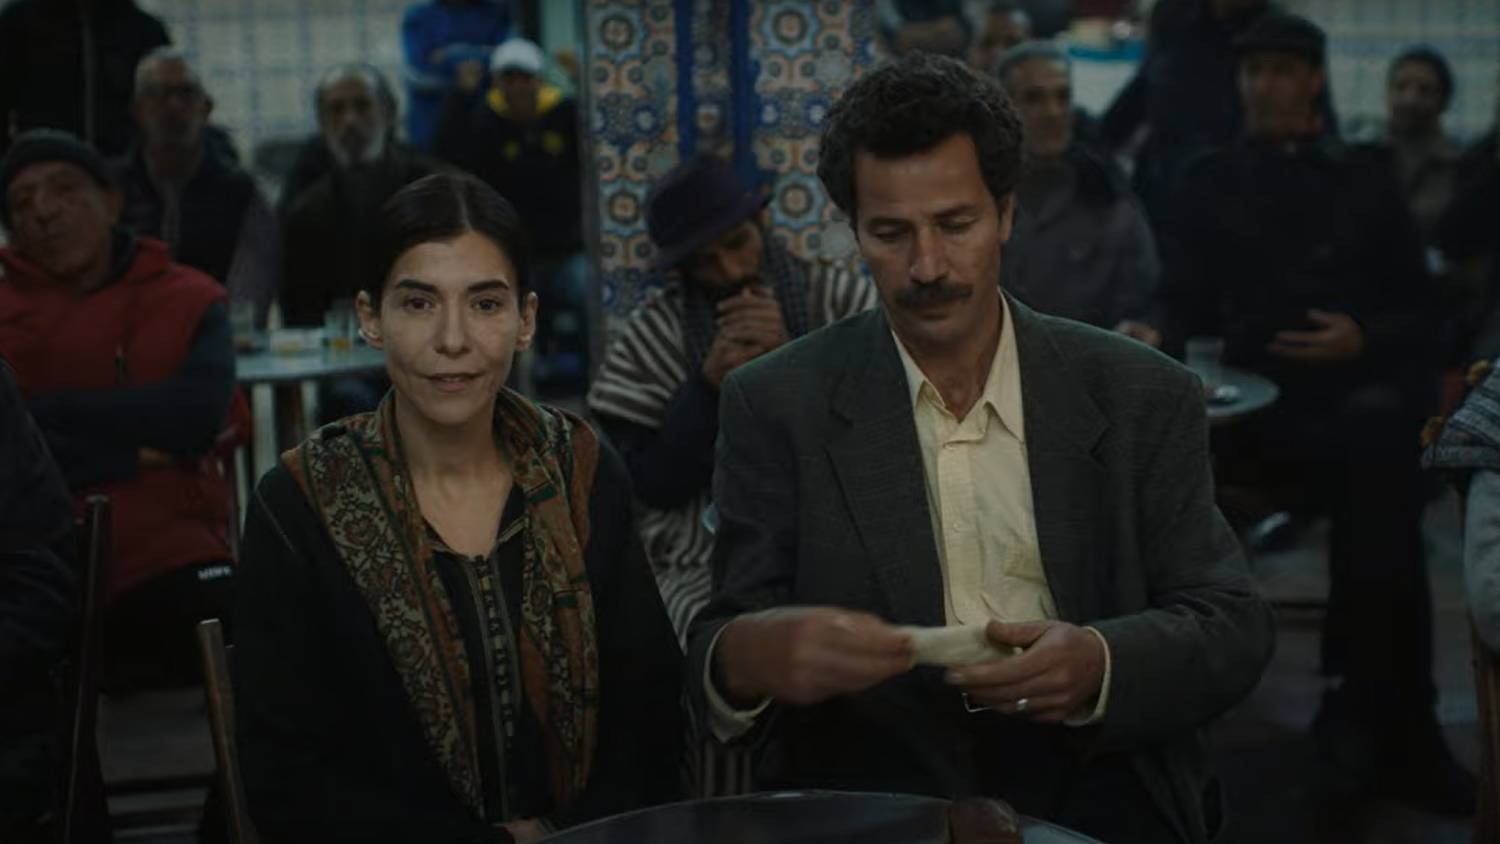 A film about a closeted middle-aged married tailor specializing in traditional Moroccan attires who falls for his new apprentice as his wife battles cancer (screengrab)